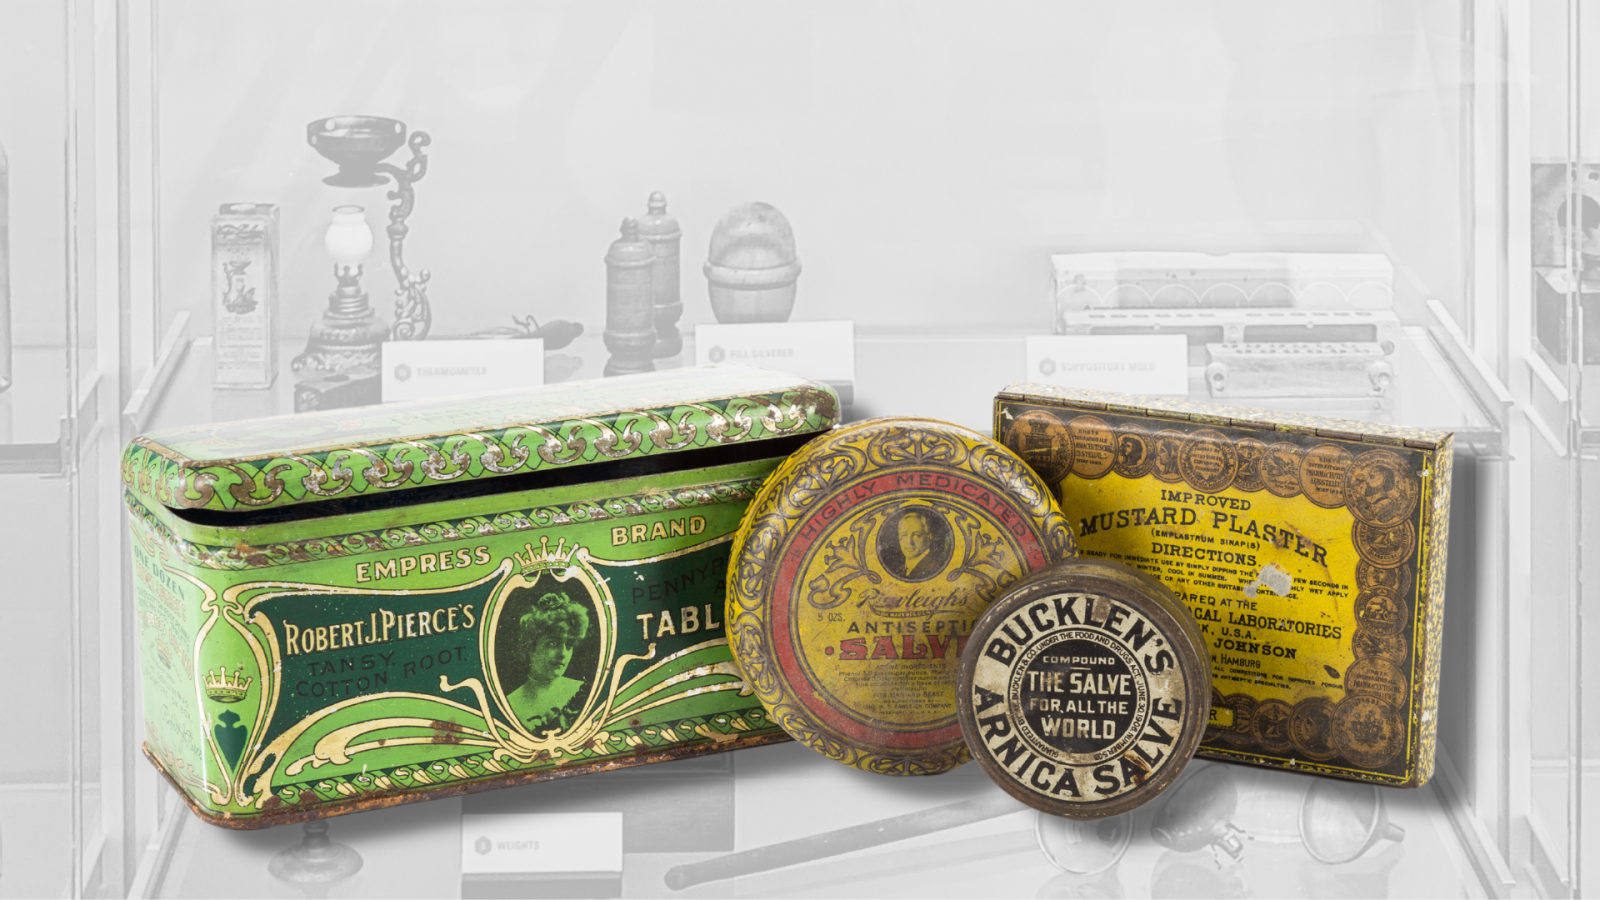 Tablet and salve tins from the VCU School of Pharmacy Heritage Trail